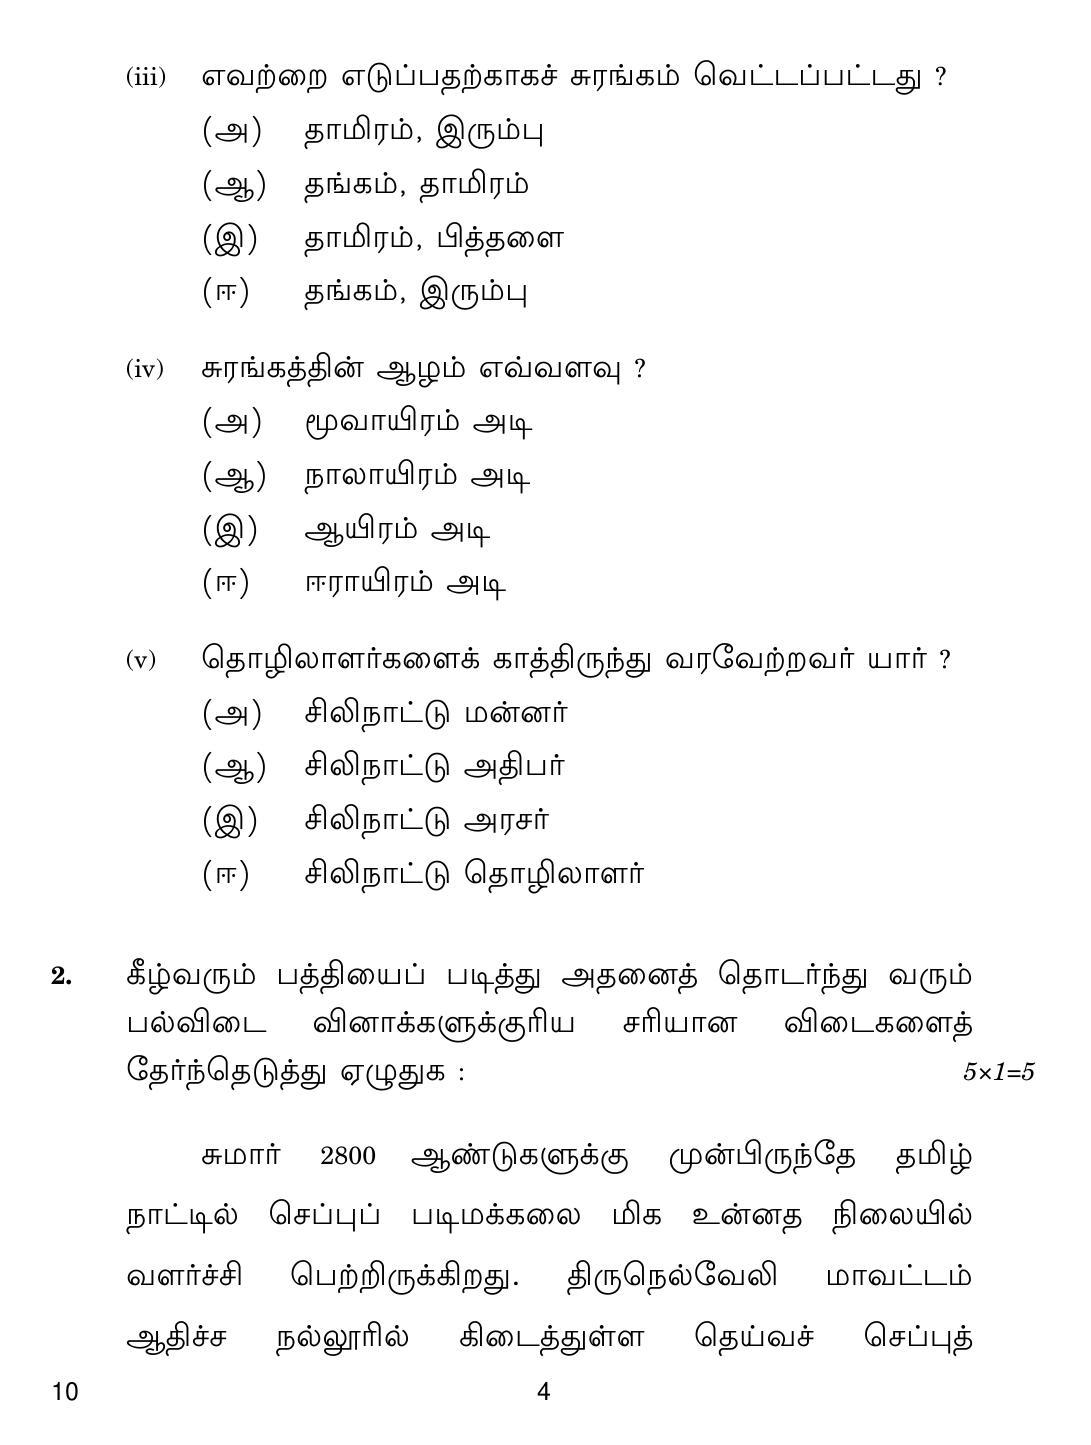 CBSE Class 10 10 Tamil 2019 Question Paper - Page 4